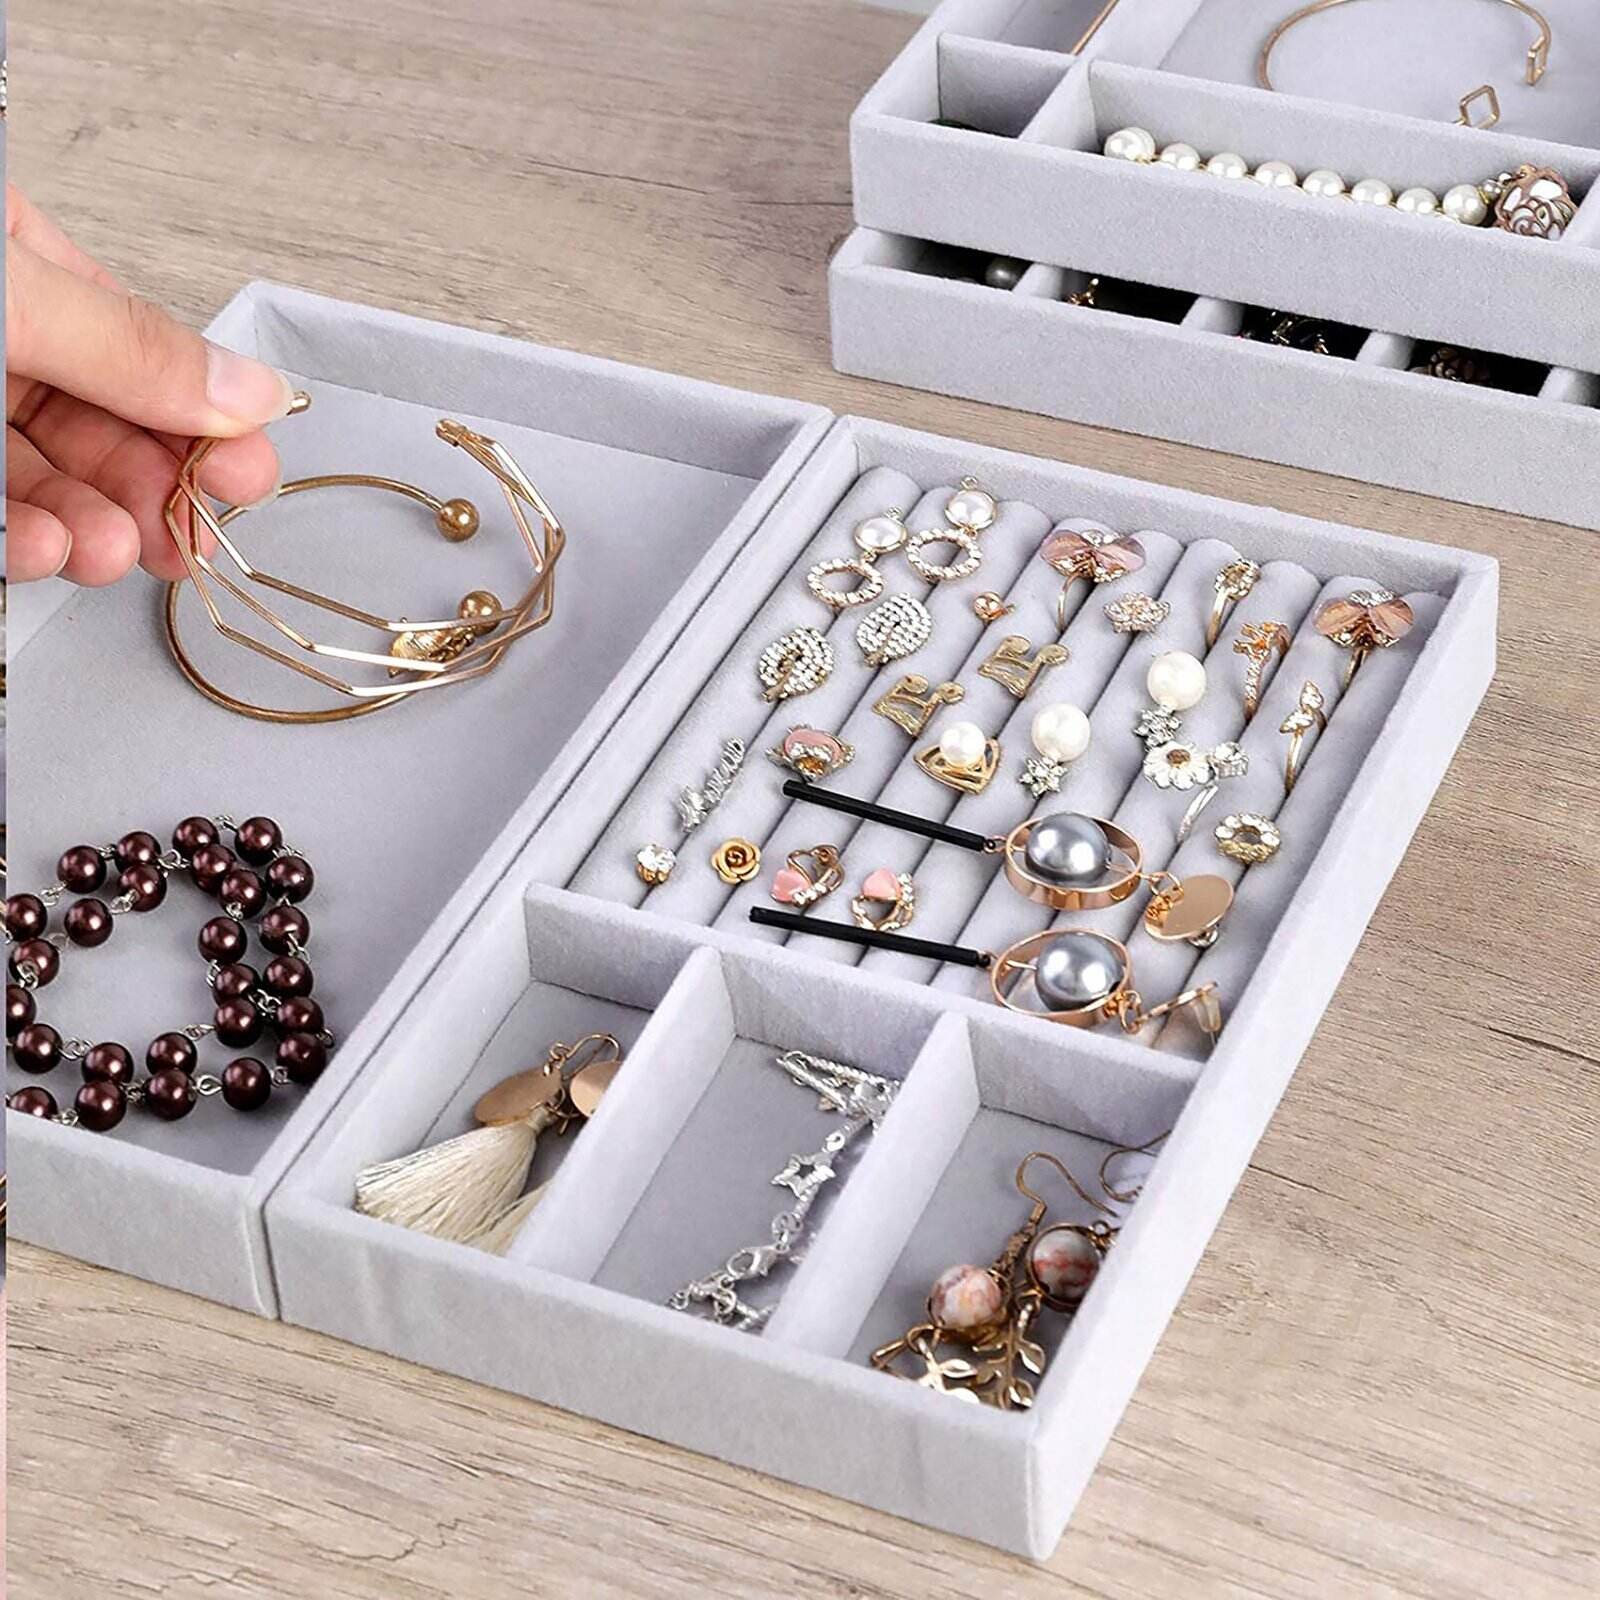 How To Store Jewelry